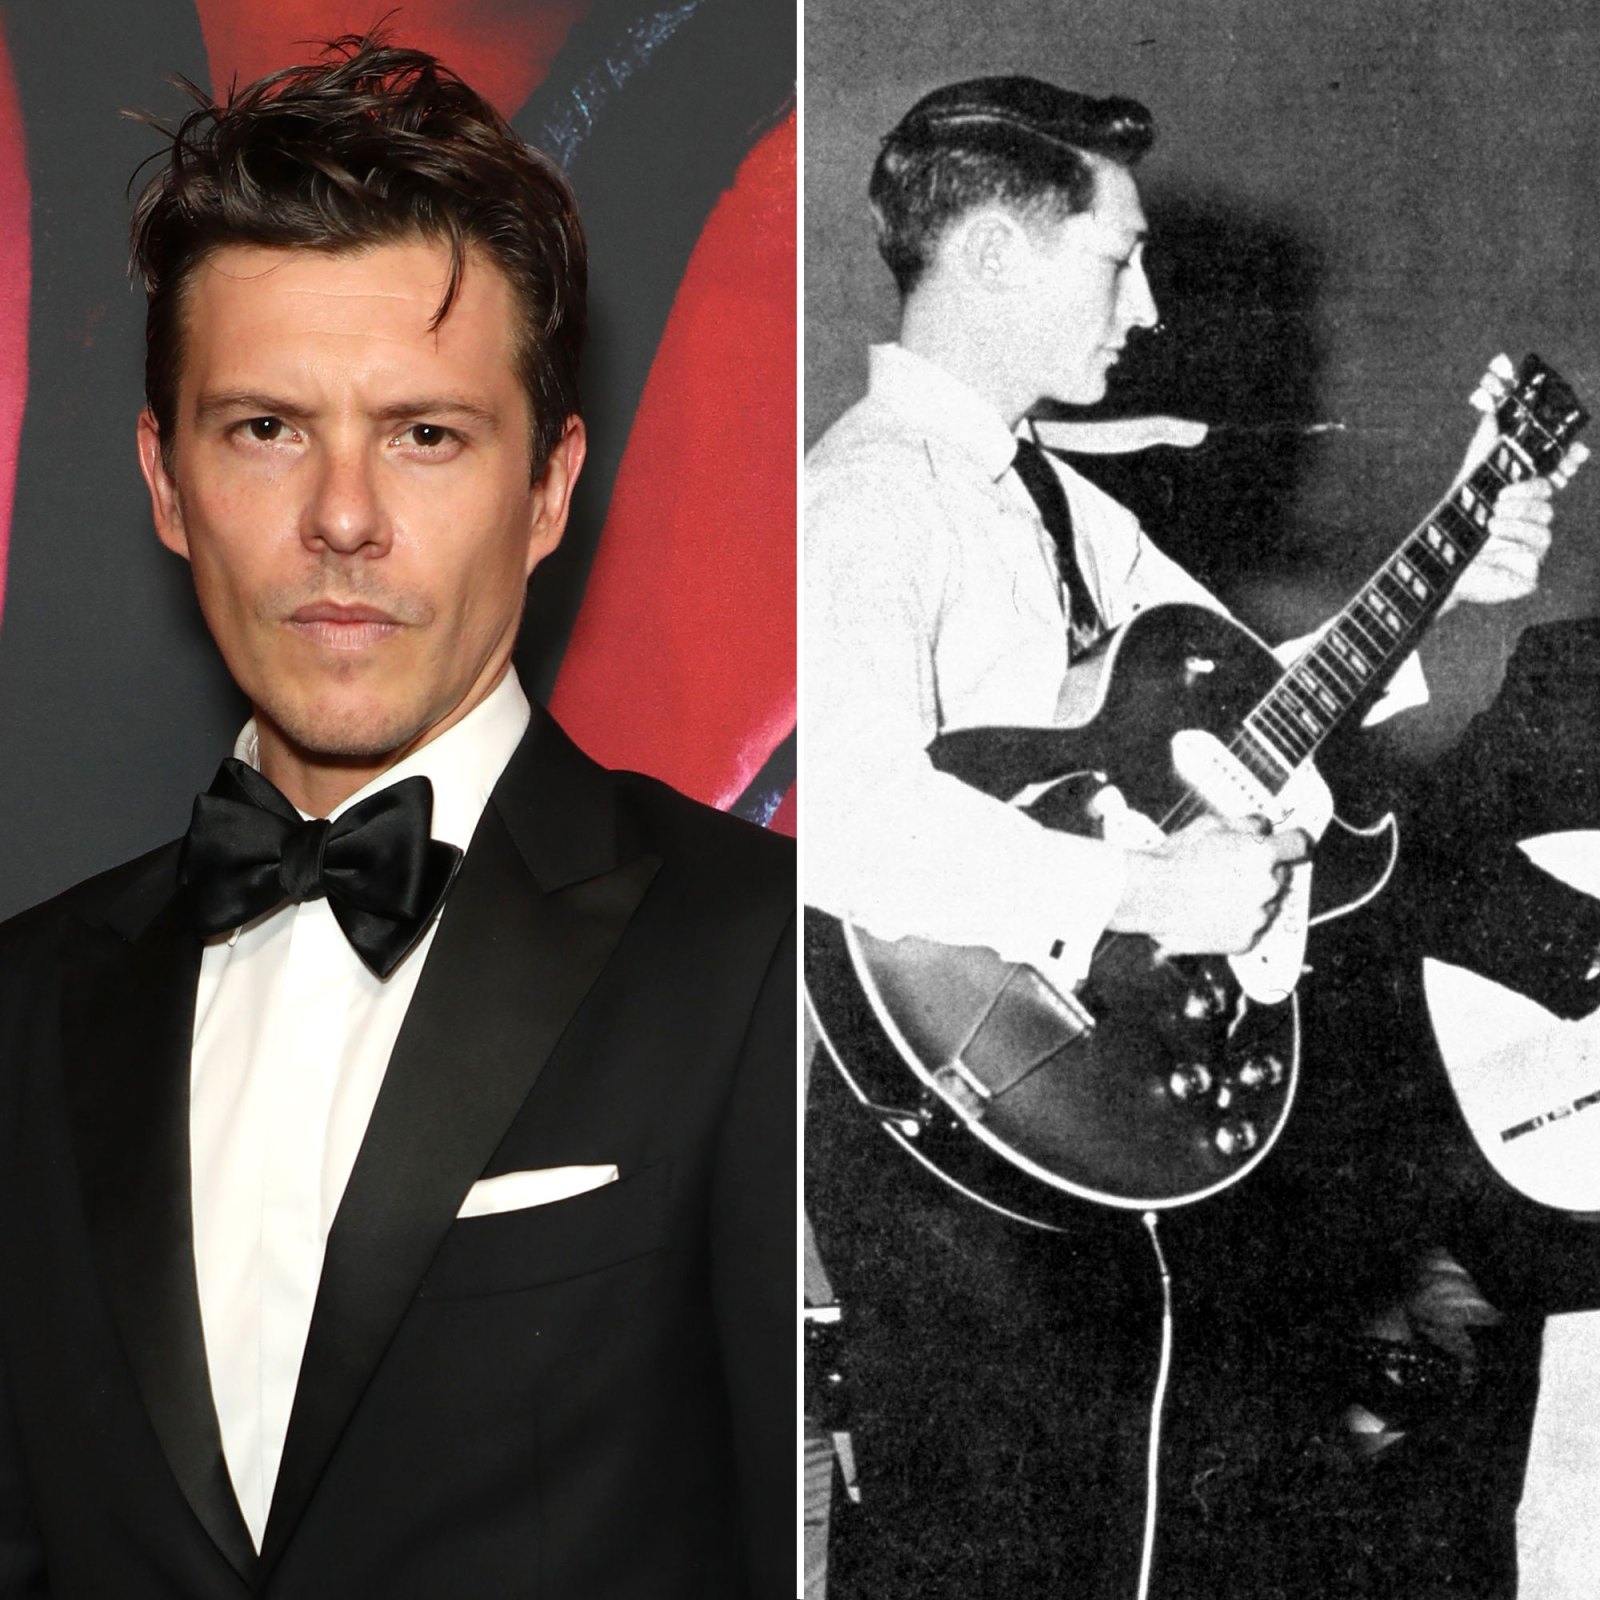 Xavier Samuel as Scotty Moore How the Elvis Cast Compares to Their Real-Life Counterparts